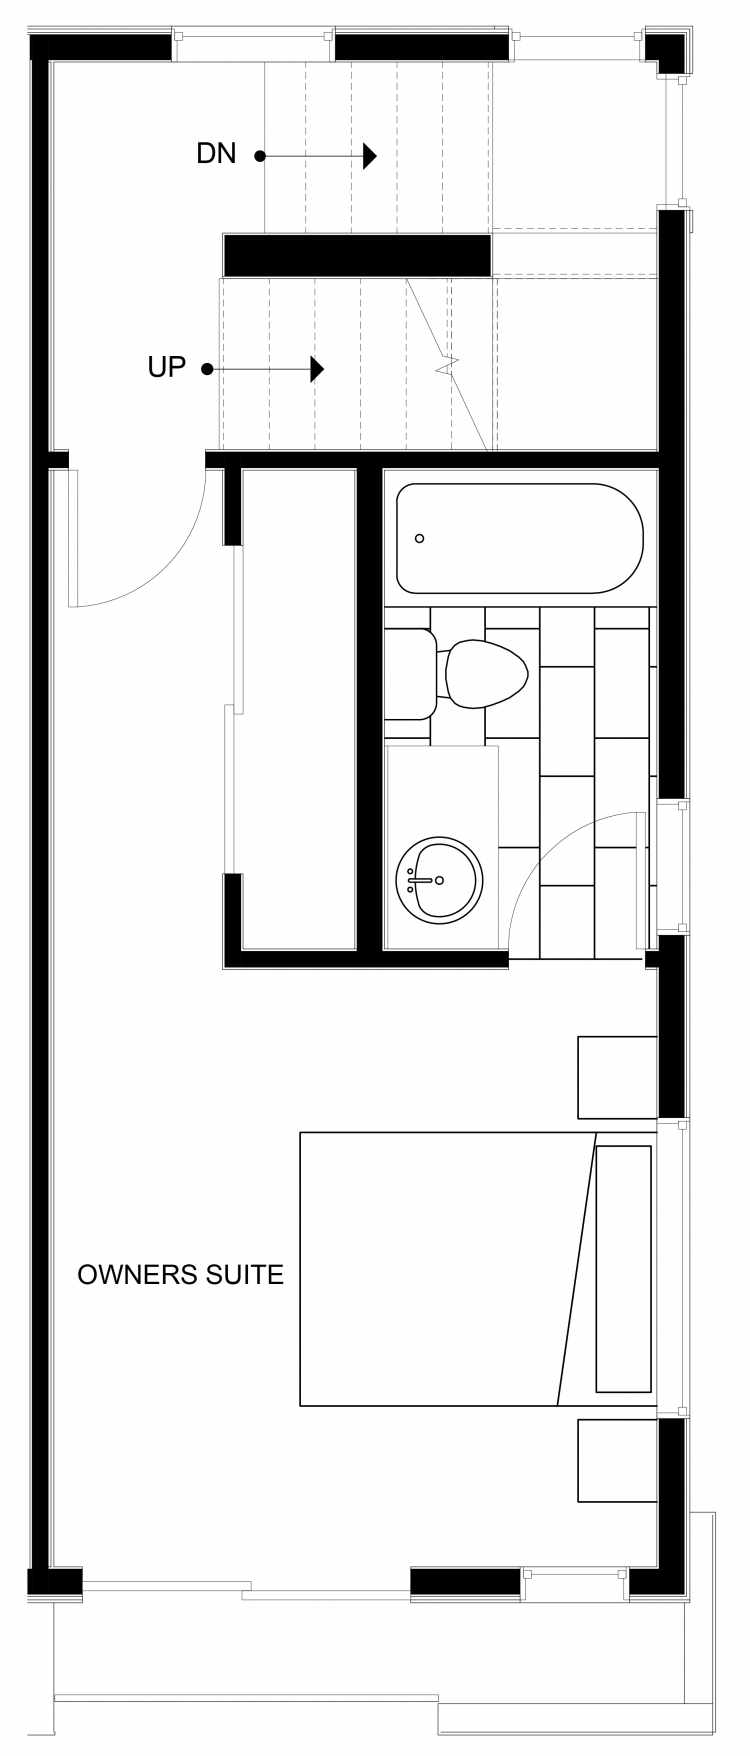 Fourth Floor Plan of 1538 15th Ave E, One of the Larrabee Townhomes in Capitol Hill